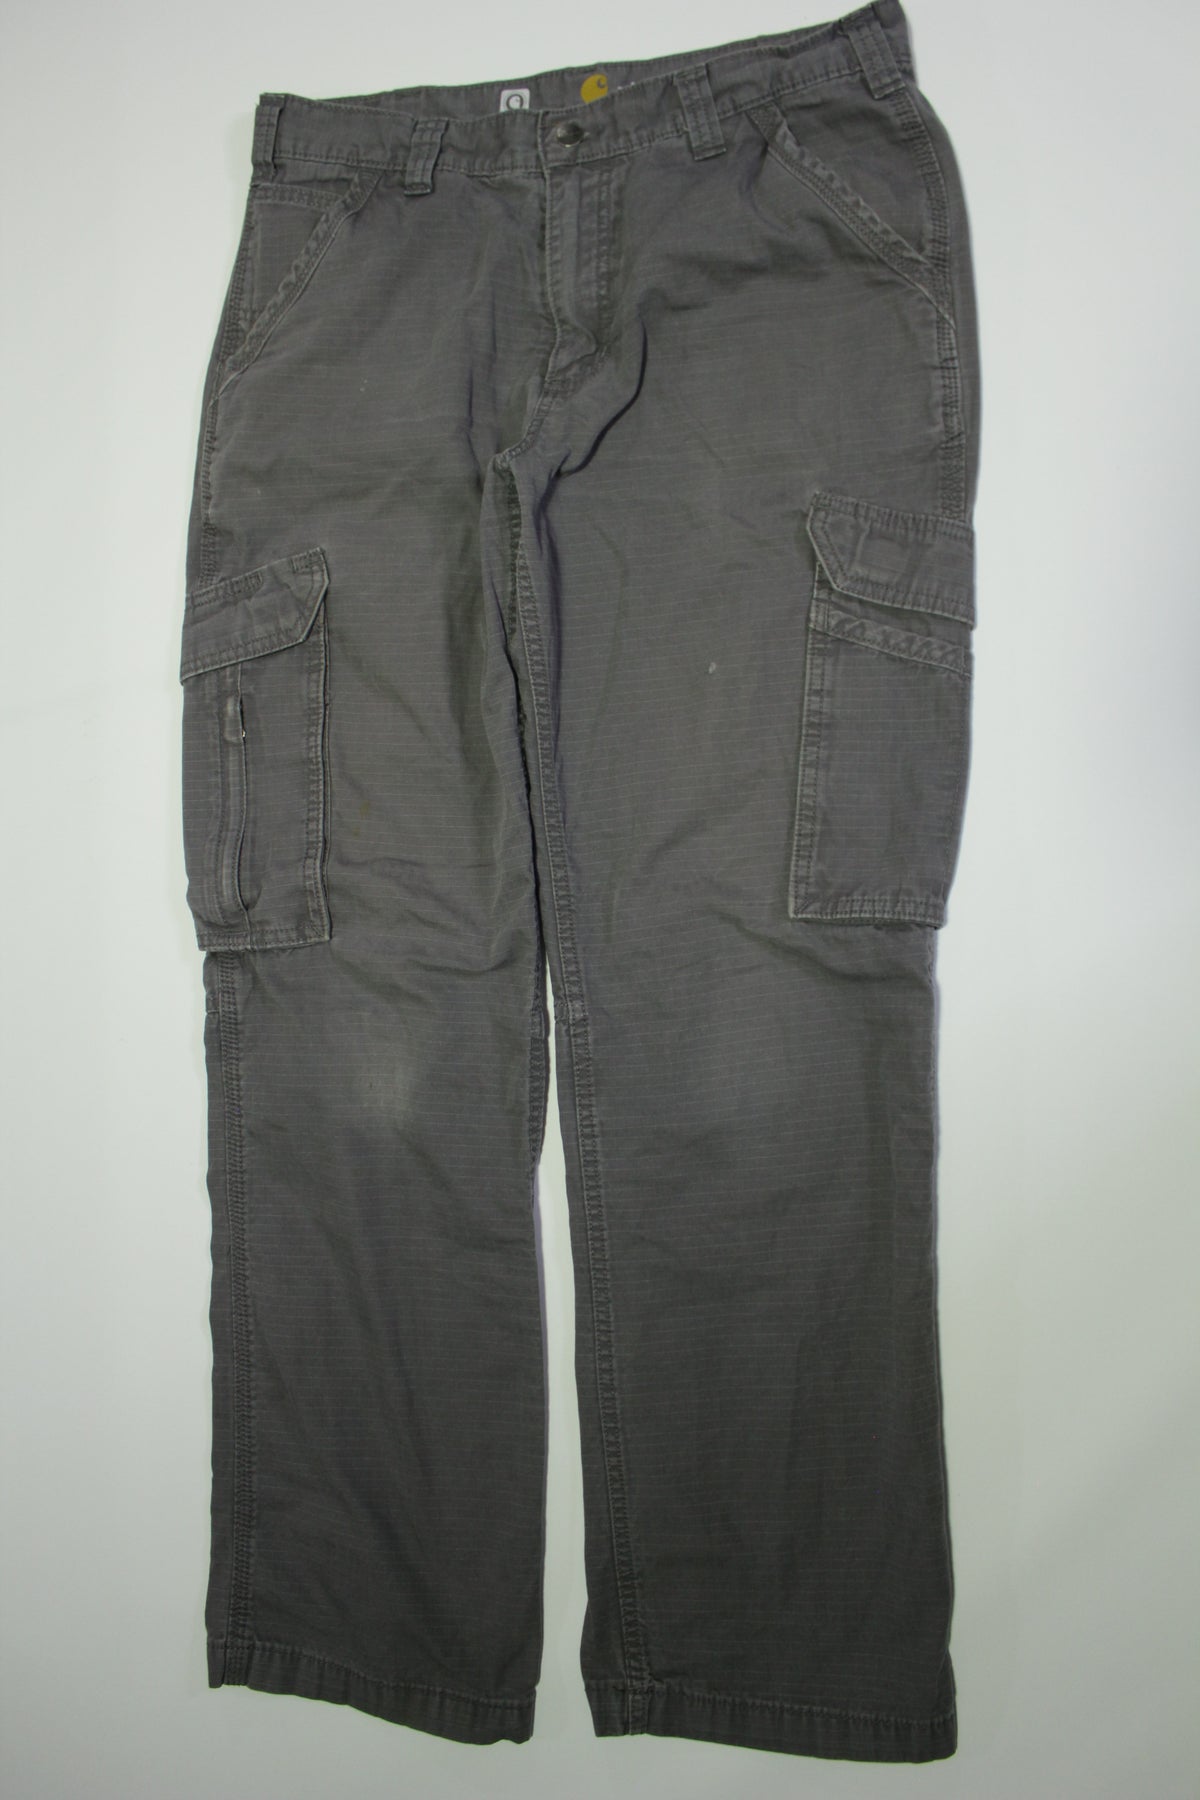 Carhartt Ripstop Cargo Dungaree Fit 101148 Utility Pocket Force Work Construction Pants